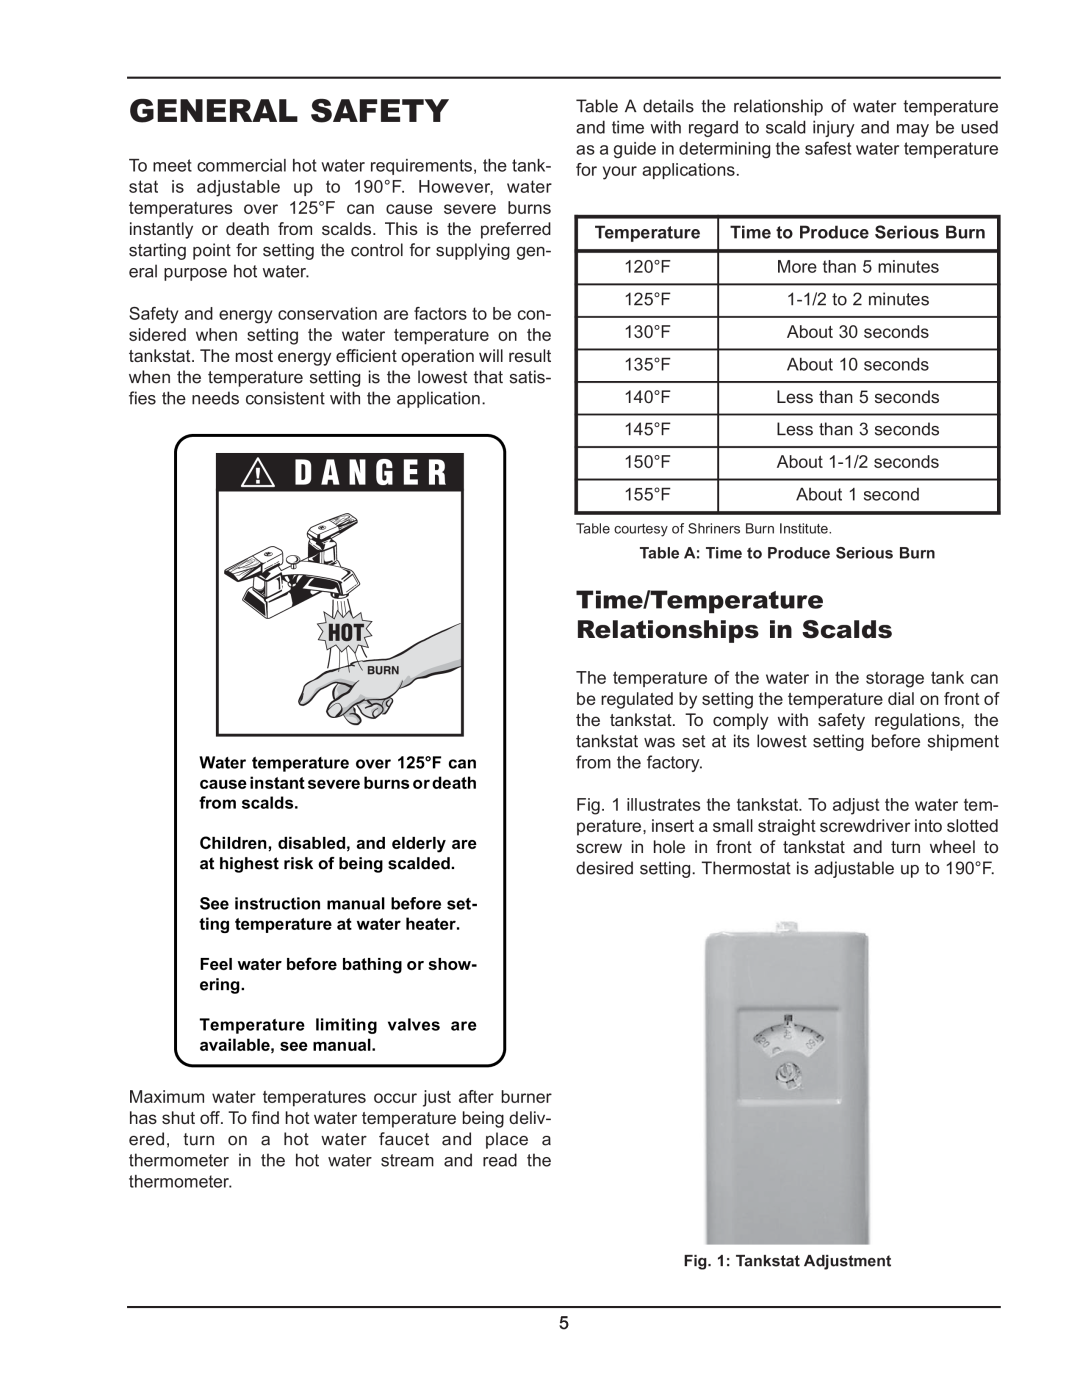 Raypak 0090A, 0195A General Safety, Time/Temperature Relationships in Scalds, Feel water before bathing or show- ering 